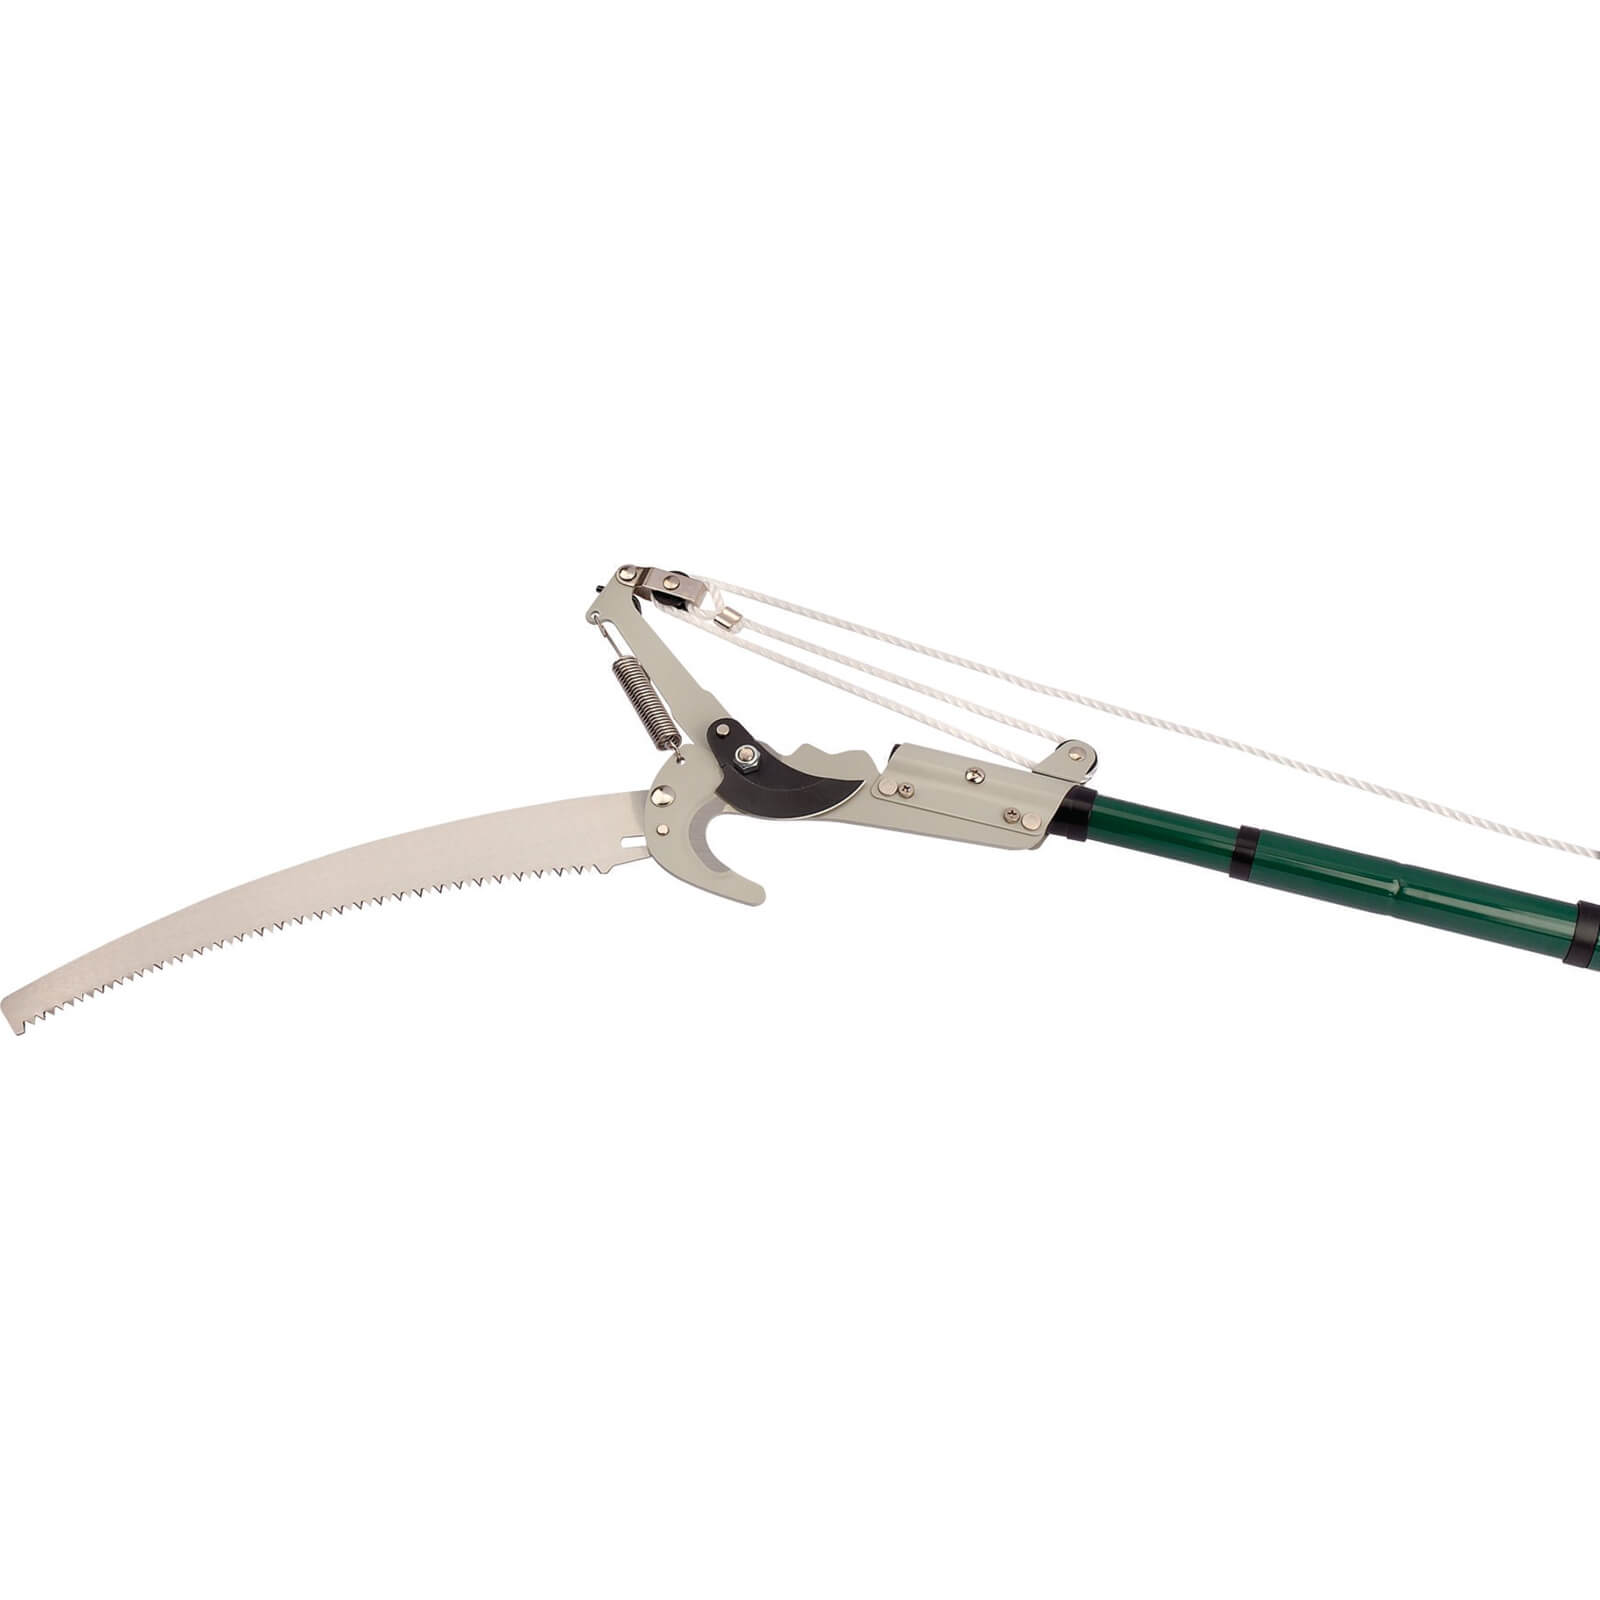 Image of Draper G1100 Telescopic Tree Pruner and Loppers with Saw 2.9m